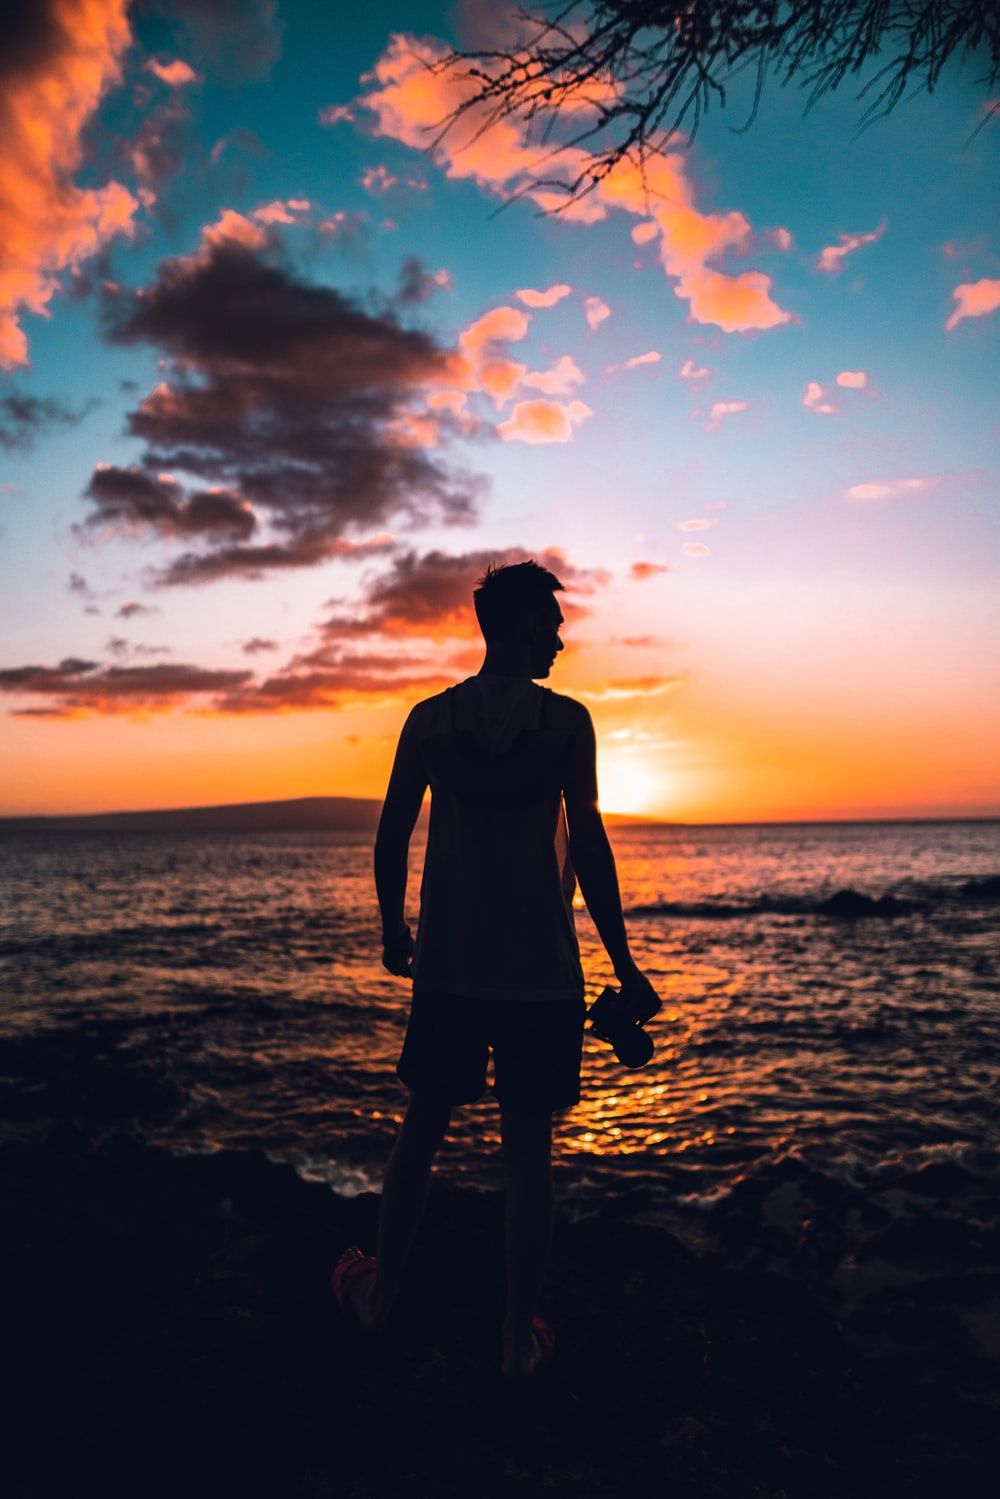 Hawaii Sunset Picture. Download Free Image